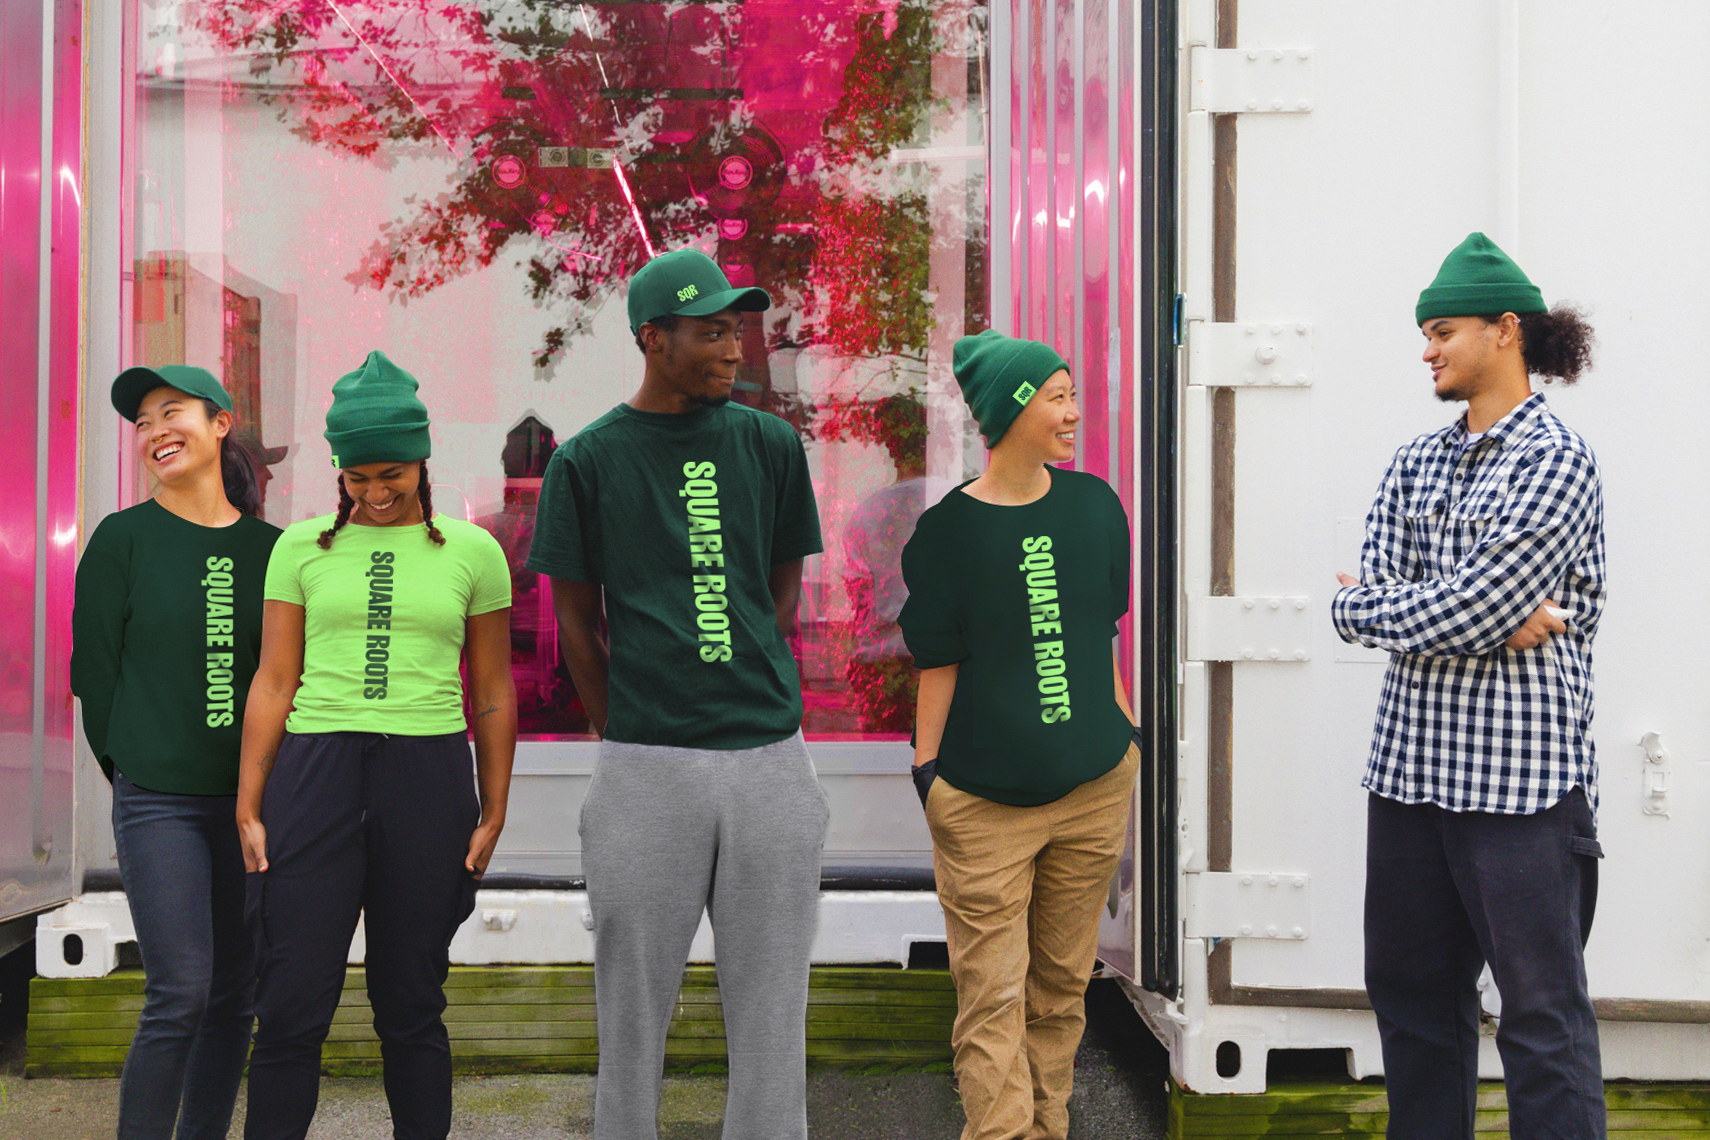 Square Roots deploys indoor farms in urban areas, growing local food for people in cities, while empowering a new generation of young farmers to embark on exciting careers in high-tech agriculture.